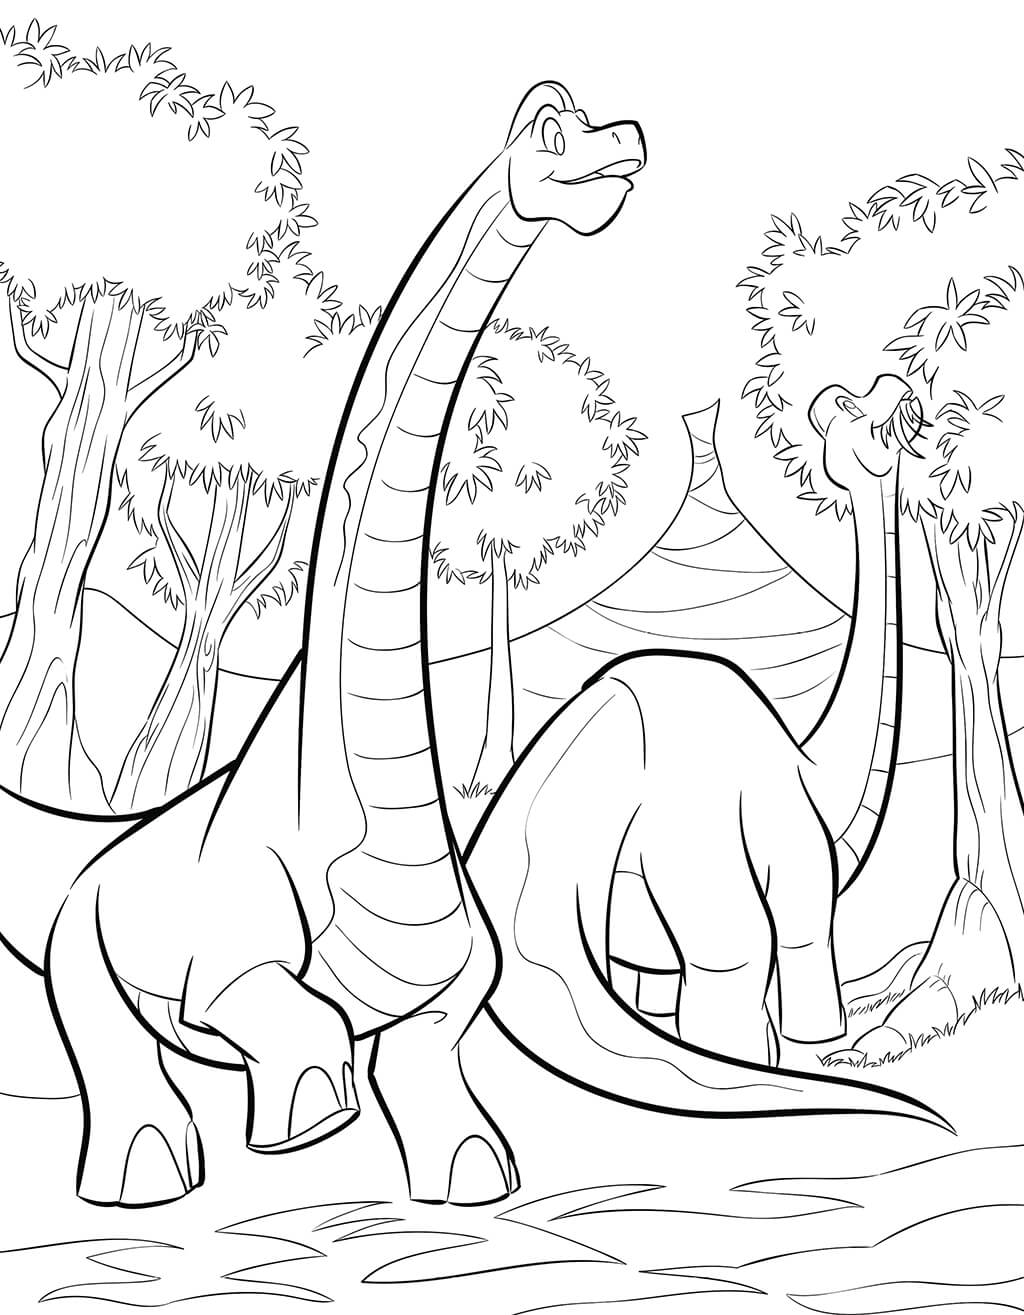 Dinosaur Coloring Book: For Kids Ages 4-8, 9-12